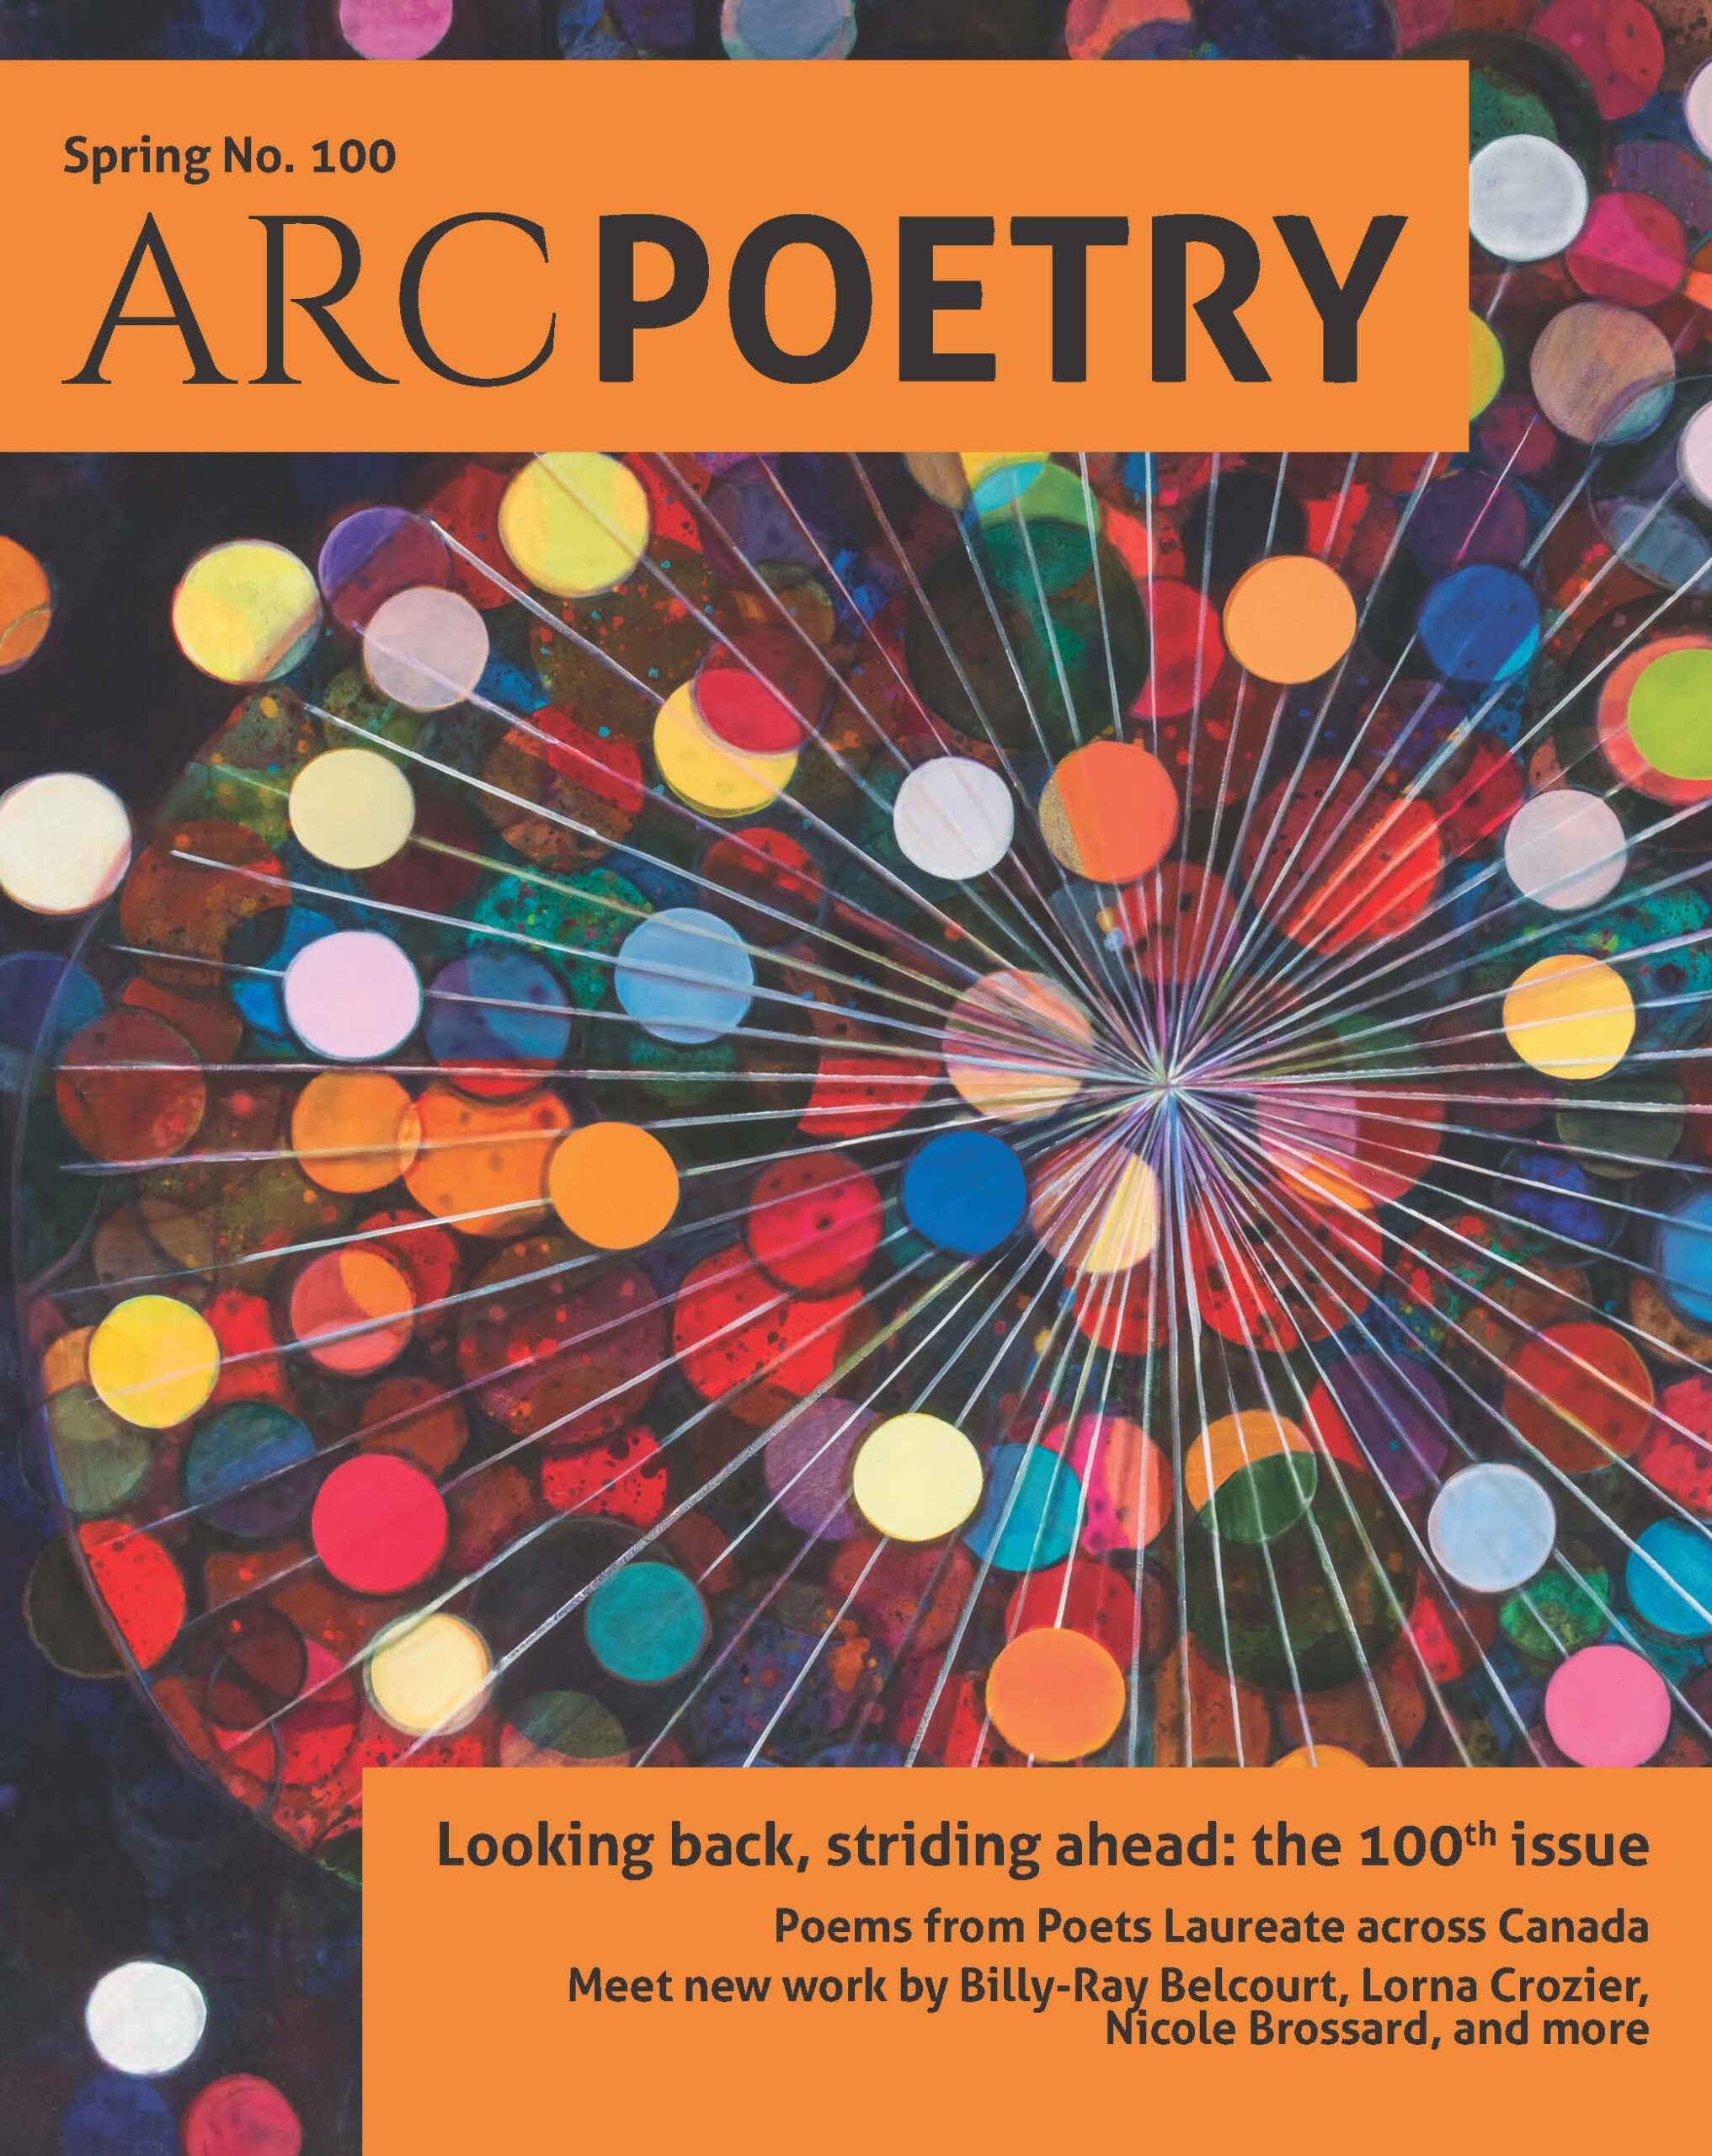 a colouful explosion of balls with orange boxes containing black text in front. the top box of text reads "spring number 100" on the top line and "Arc Poetry" on the bottom line.